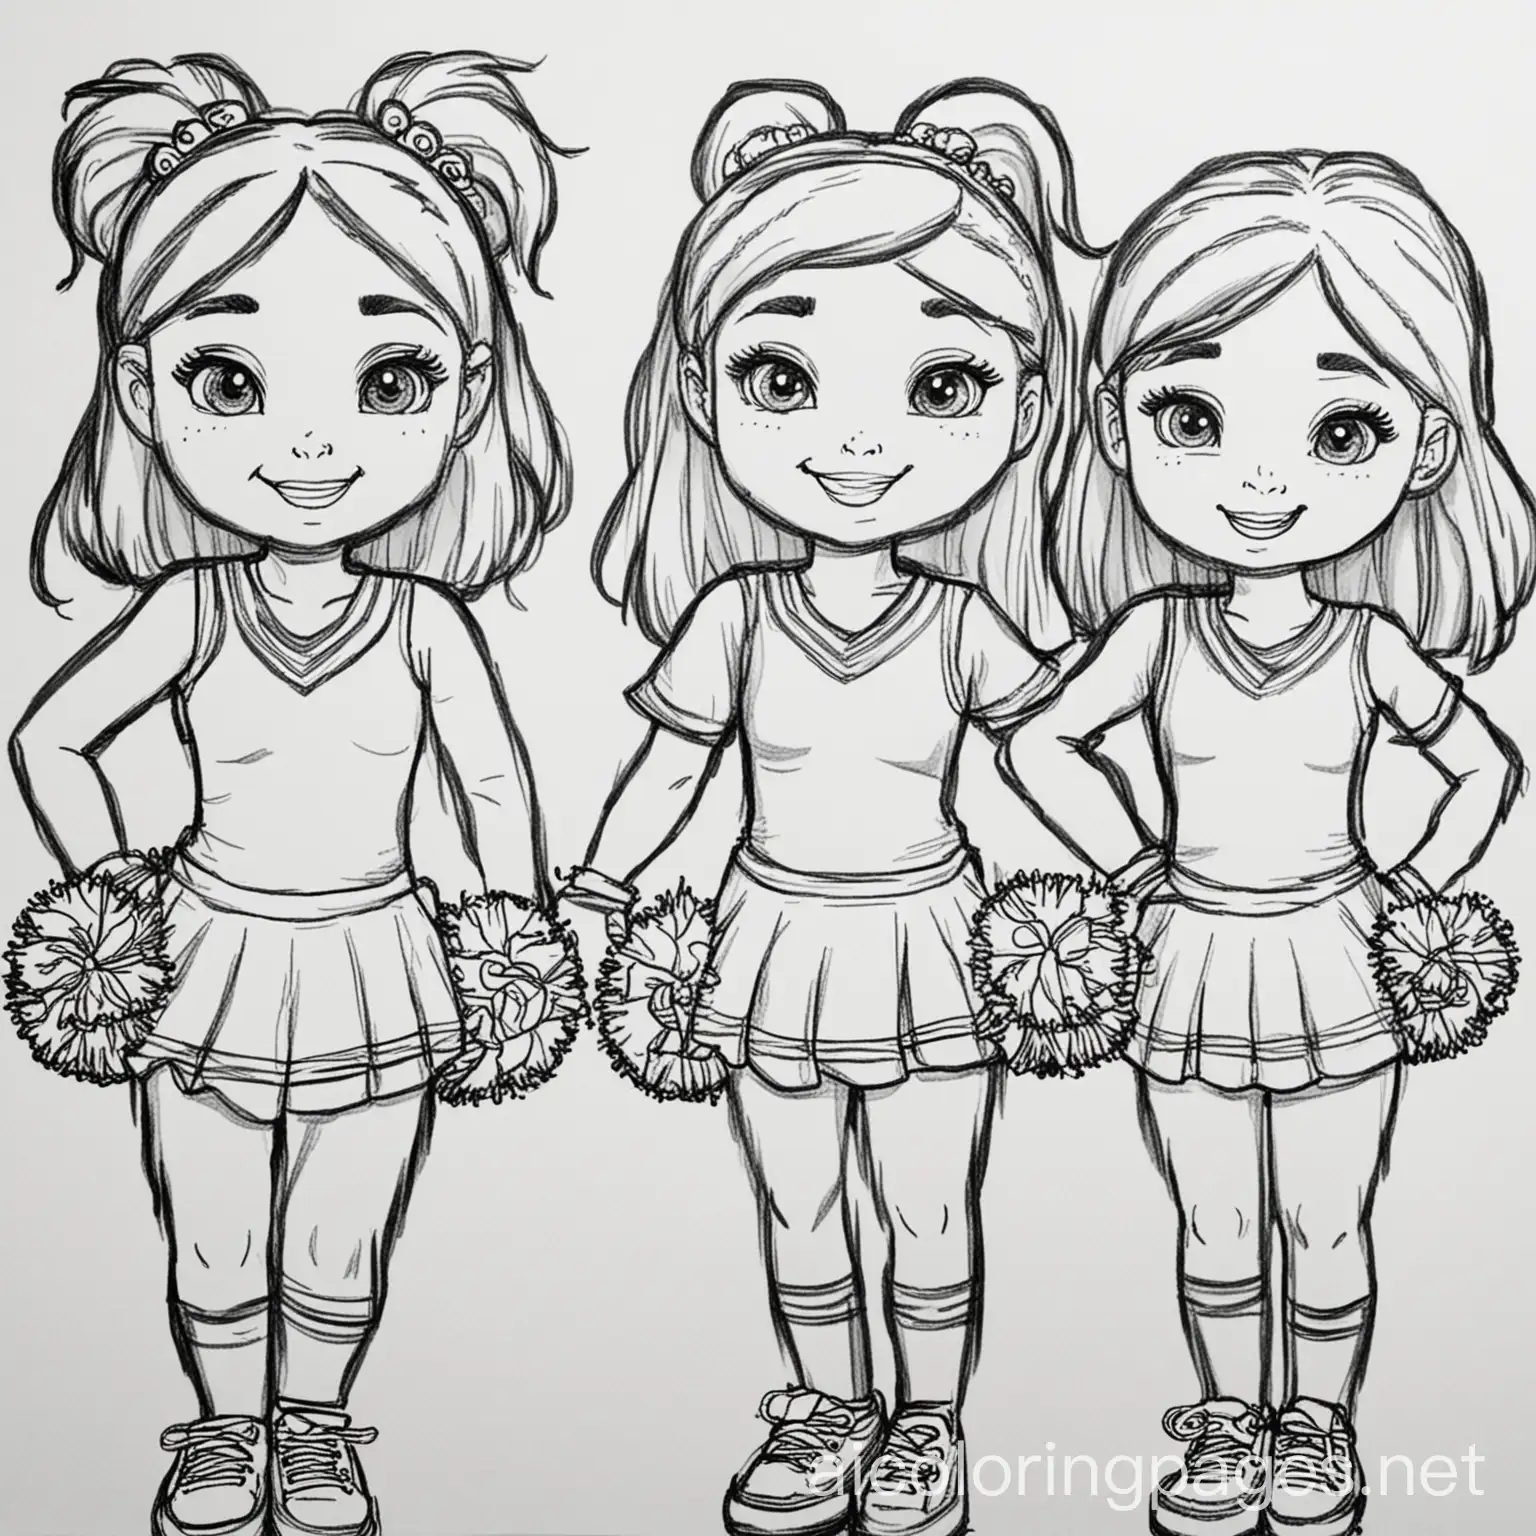 Young-Cheerleaders-Coloring-Page-with-Ample-White-Space